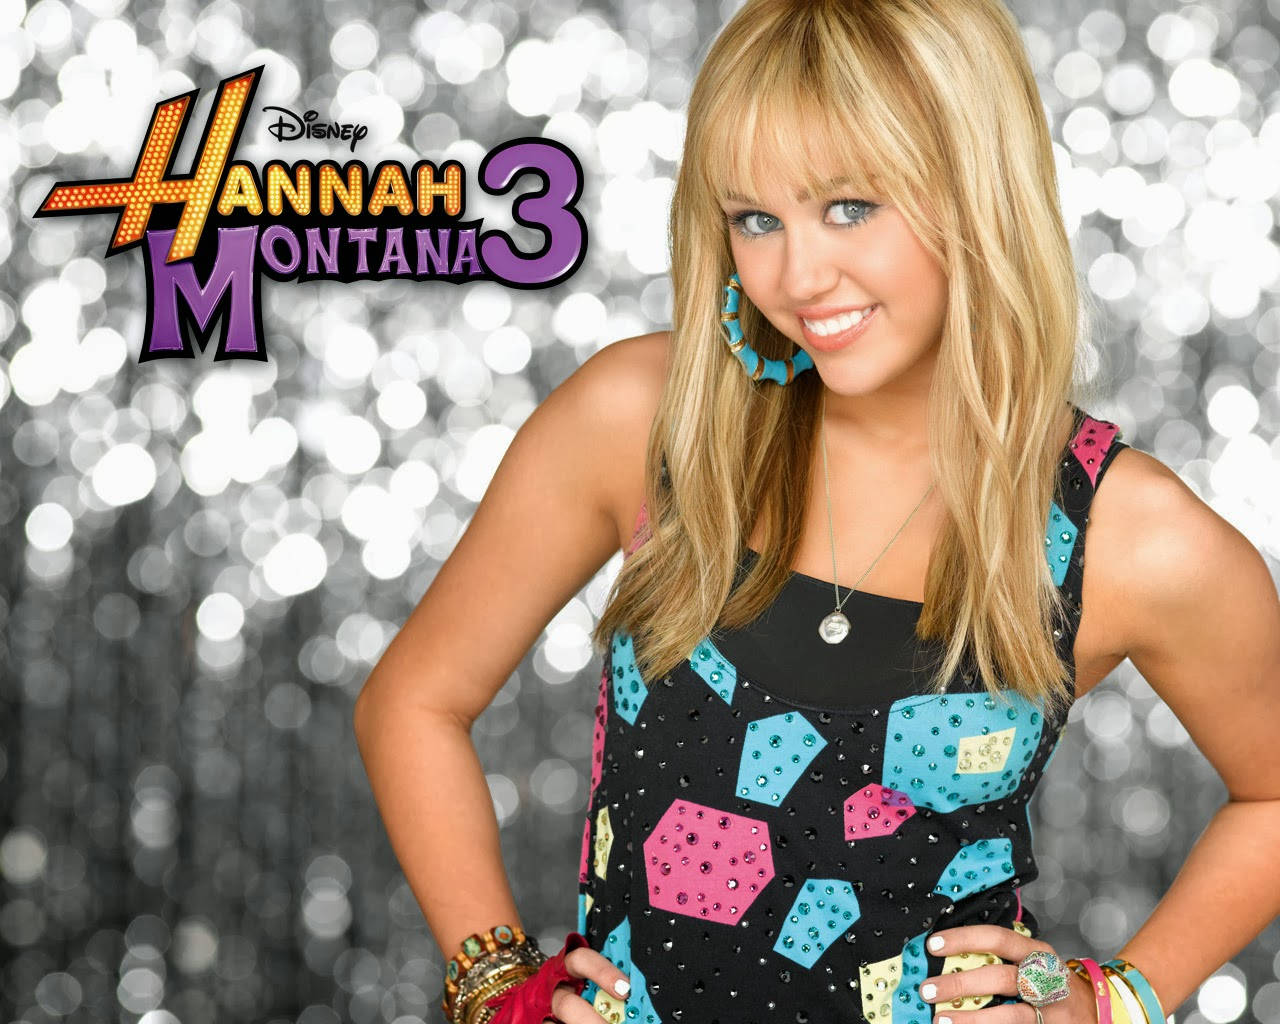 Hannah Montana ready to rock the stage in Season 3 Wallpaper